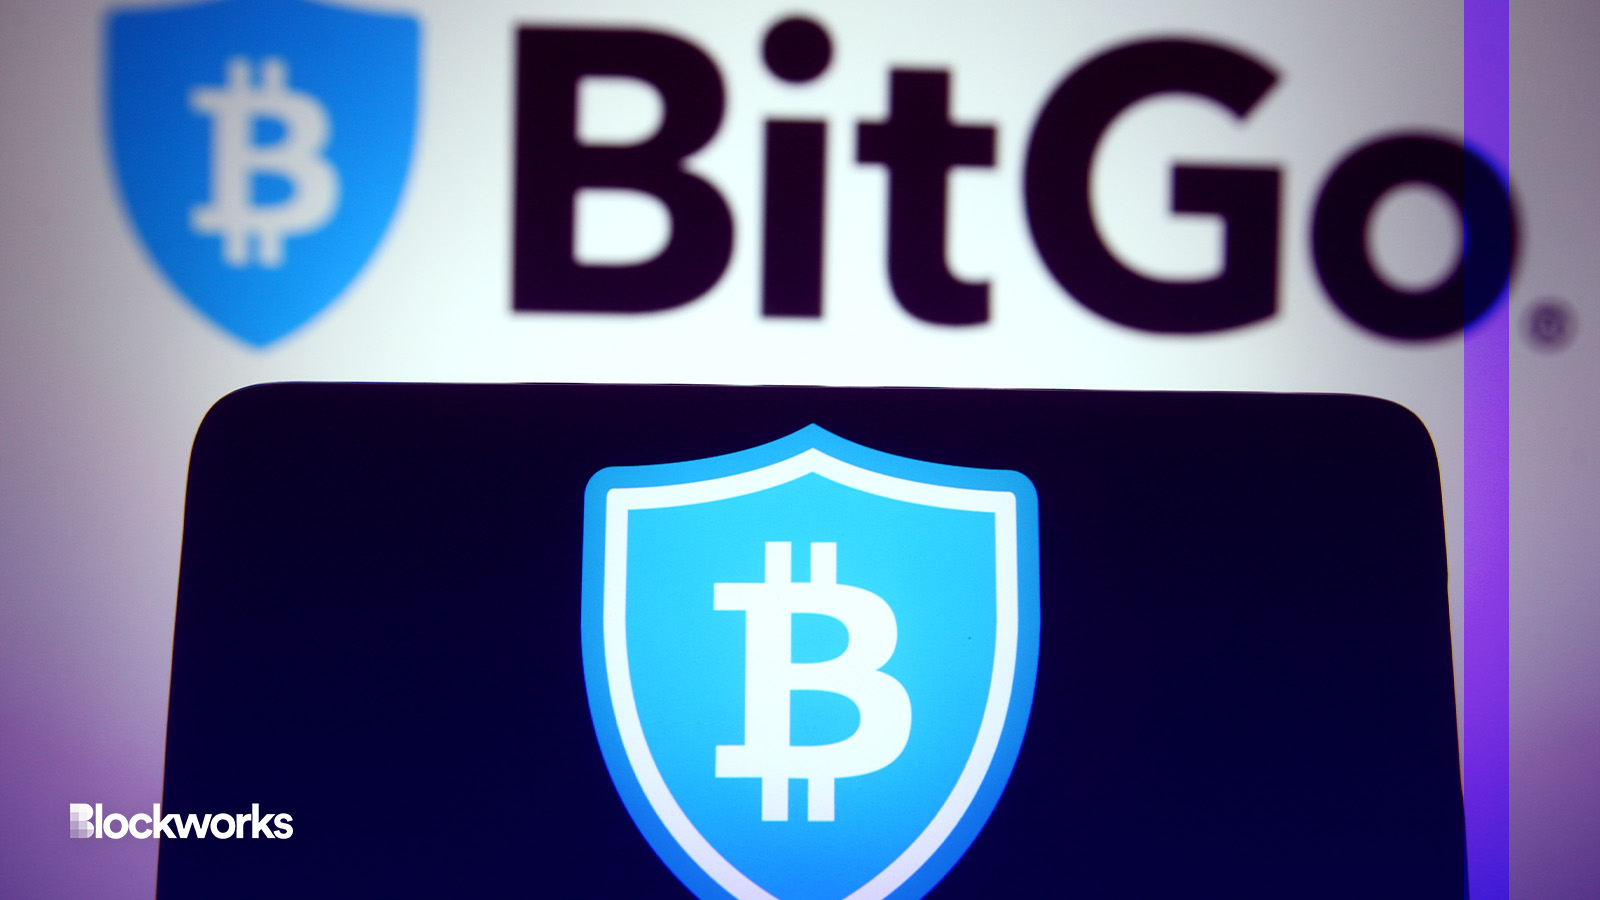 BitGo – How institutions and platforms securely access crypto